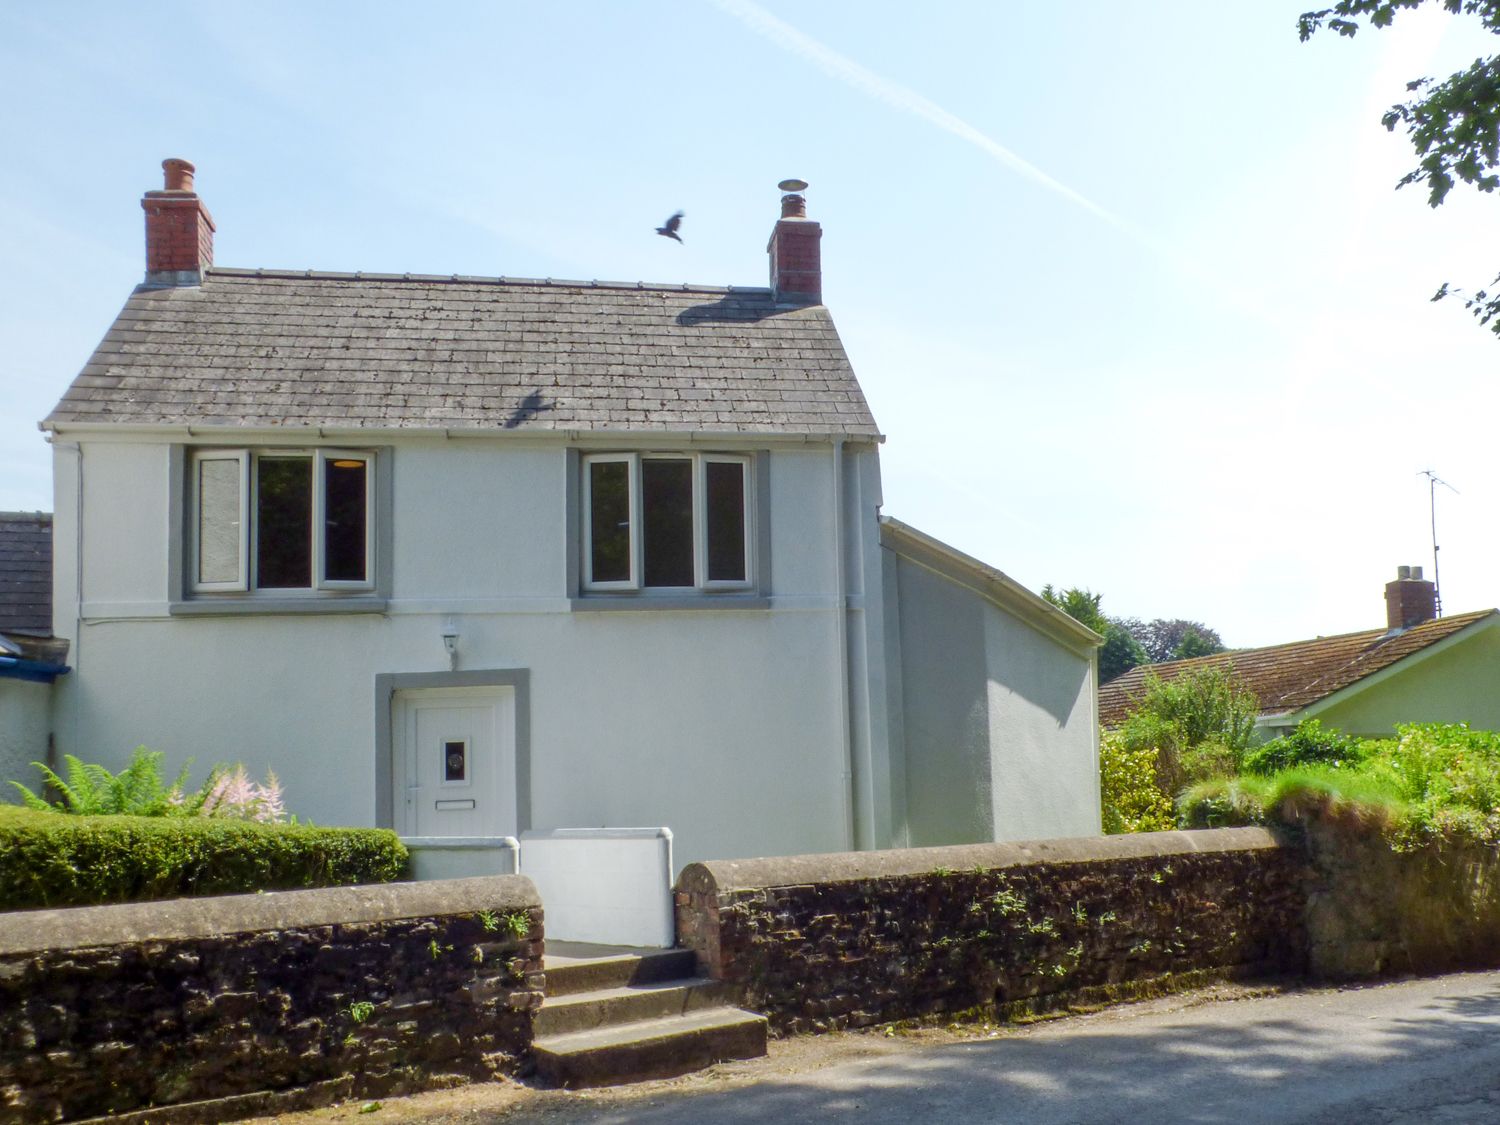 Spring Garden Cottage - South Wales - 945899 - photo 1